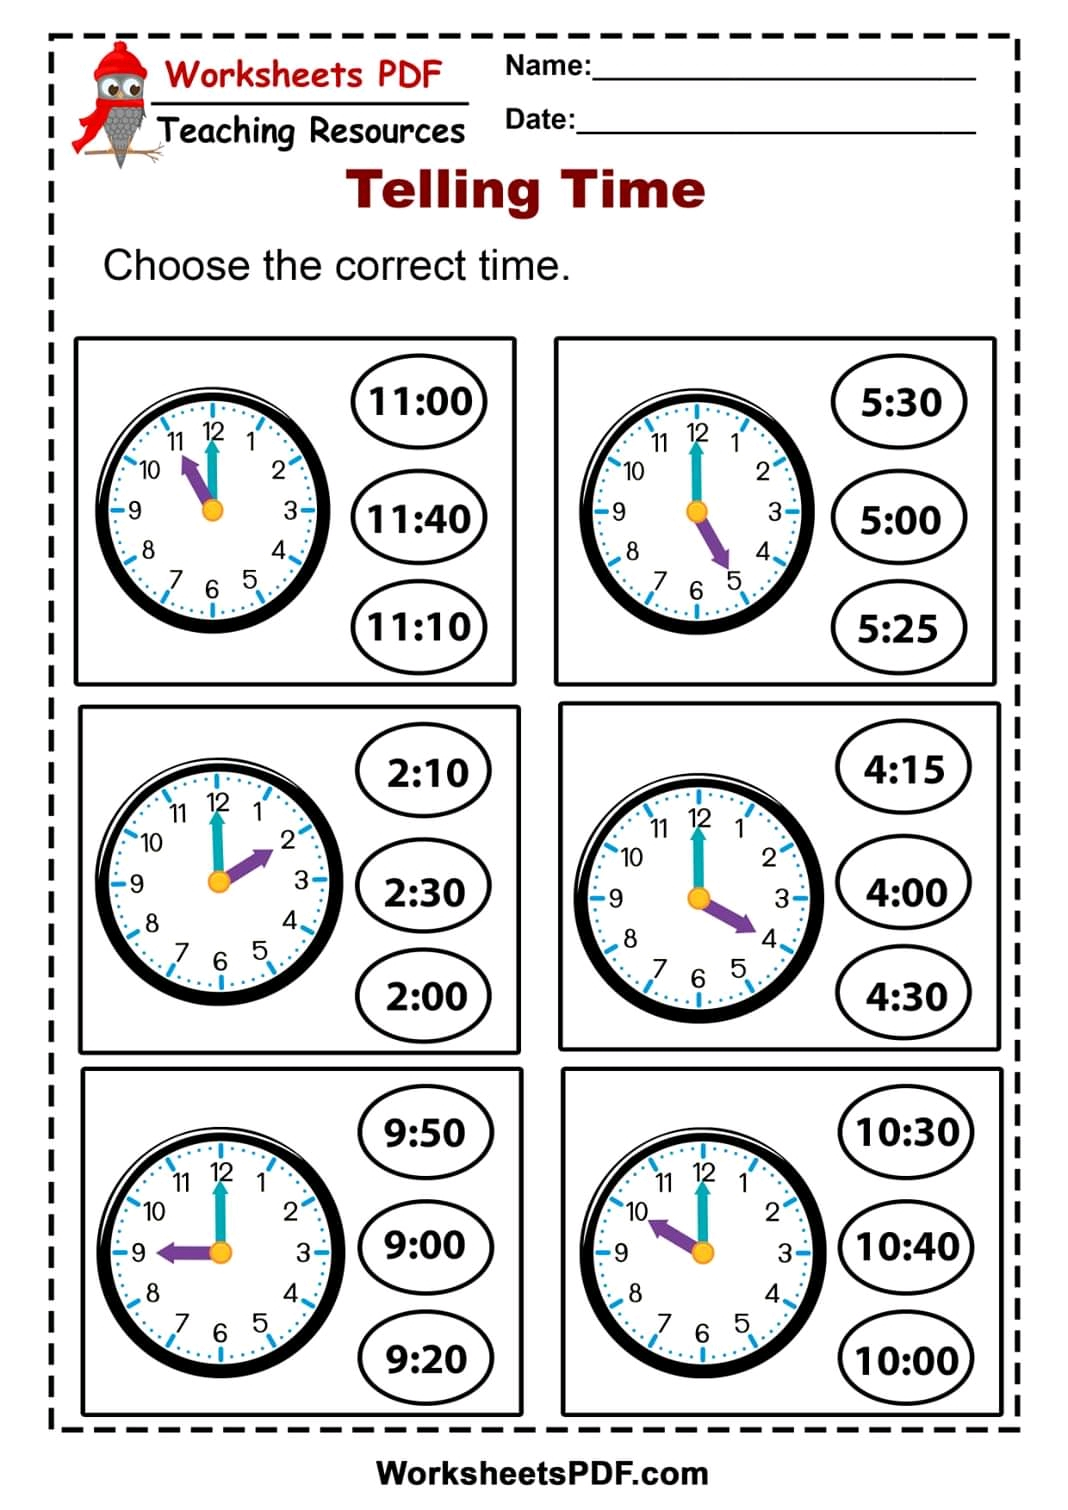 Worksheets On Telling Time